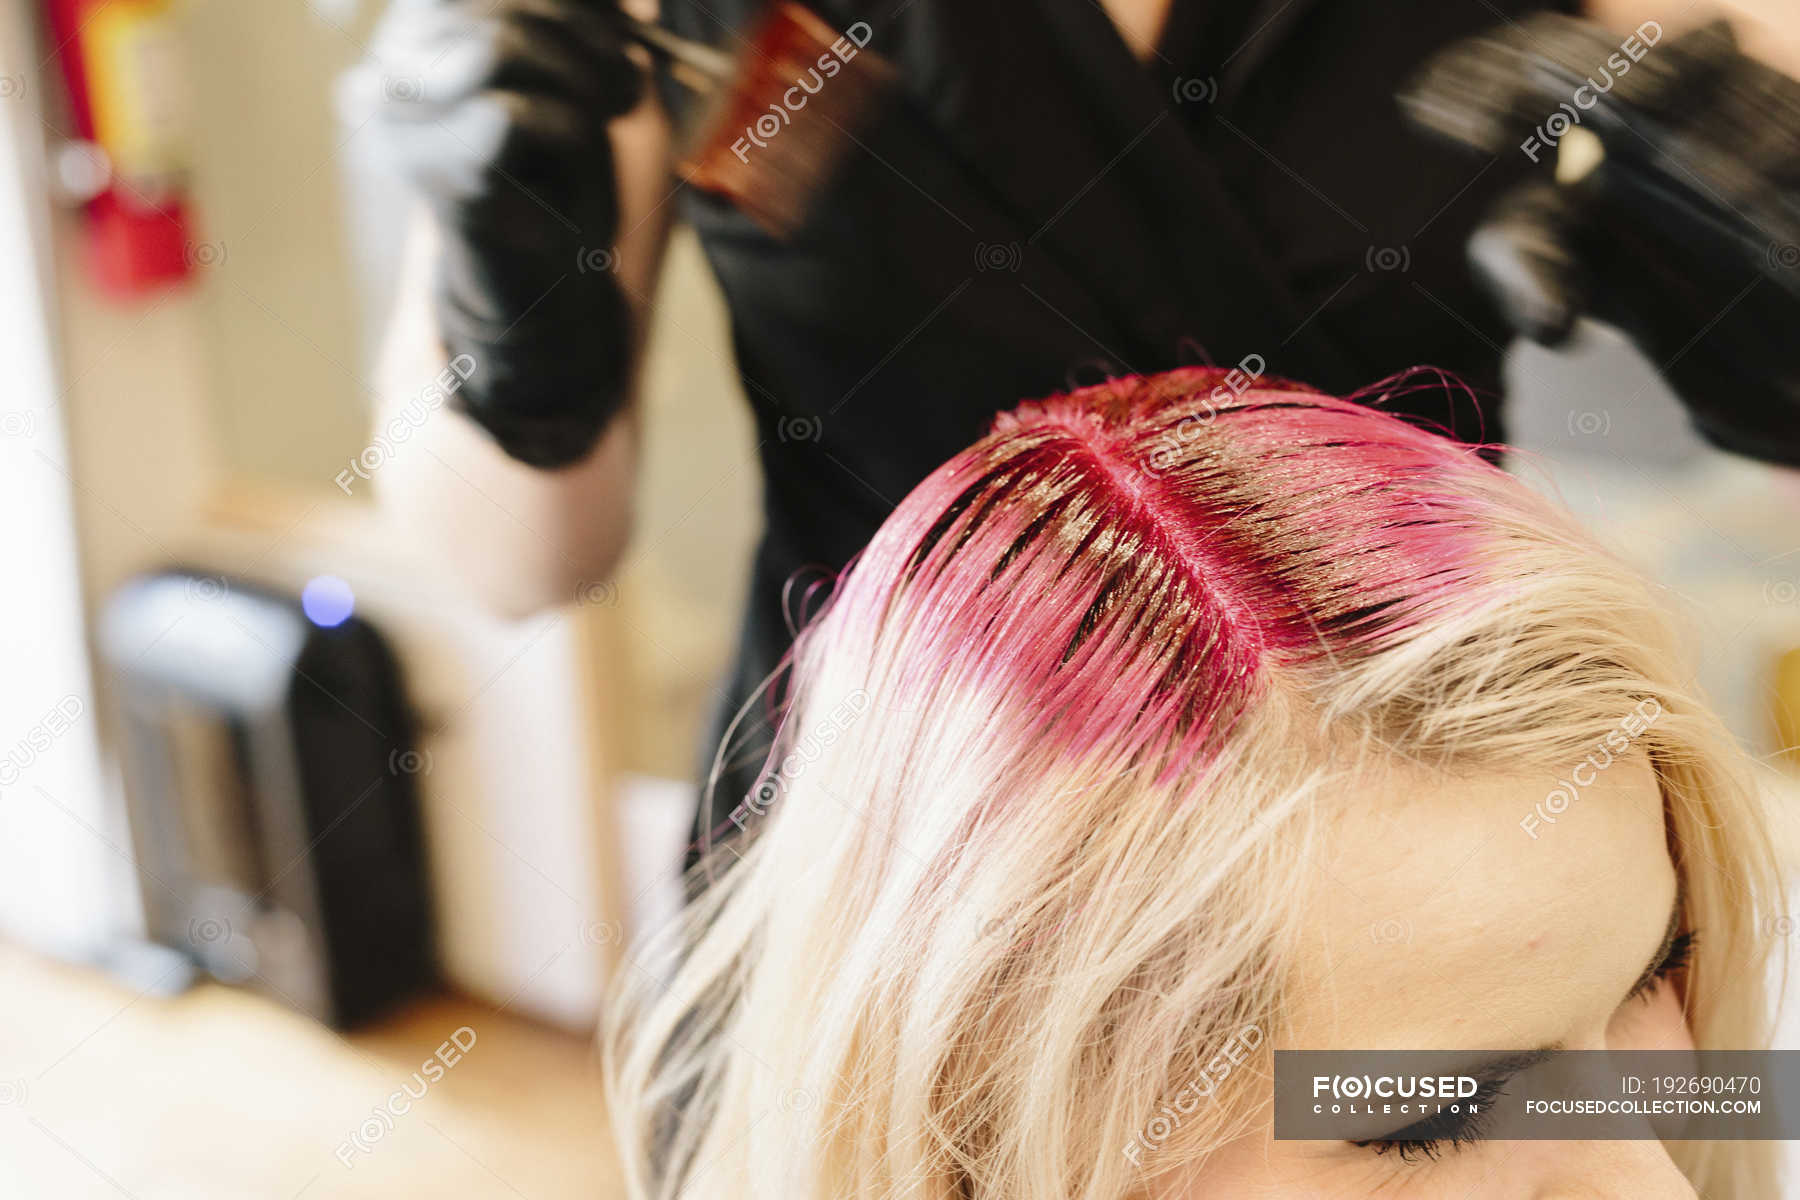 Female Hair Colorist In Gloves Applying Red Hair Dye To Client